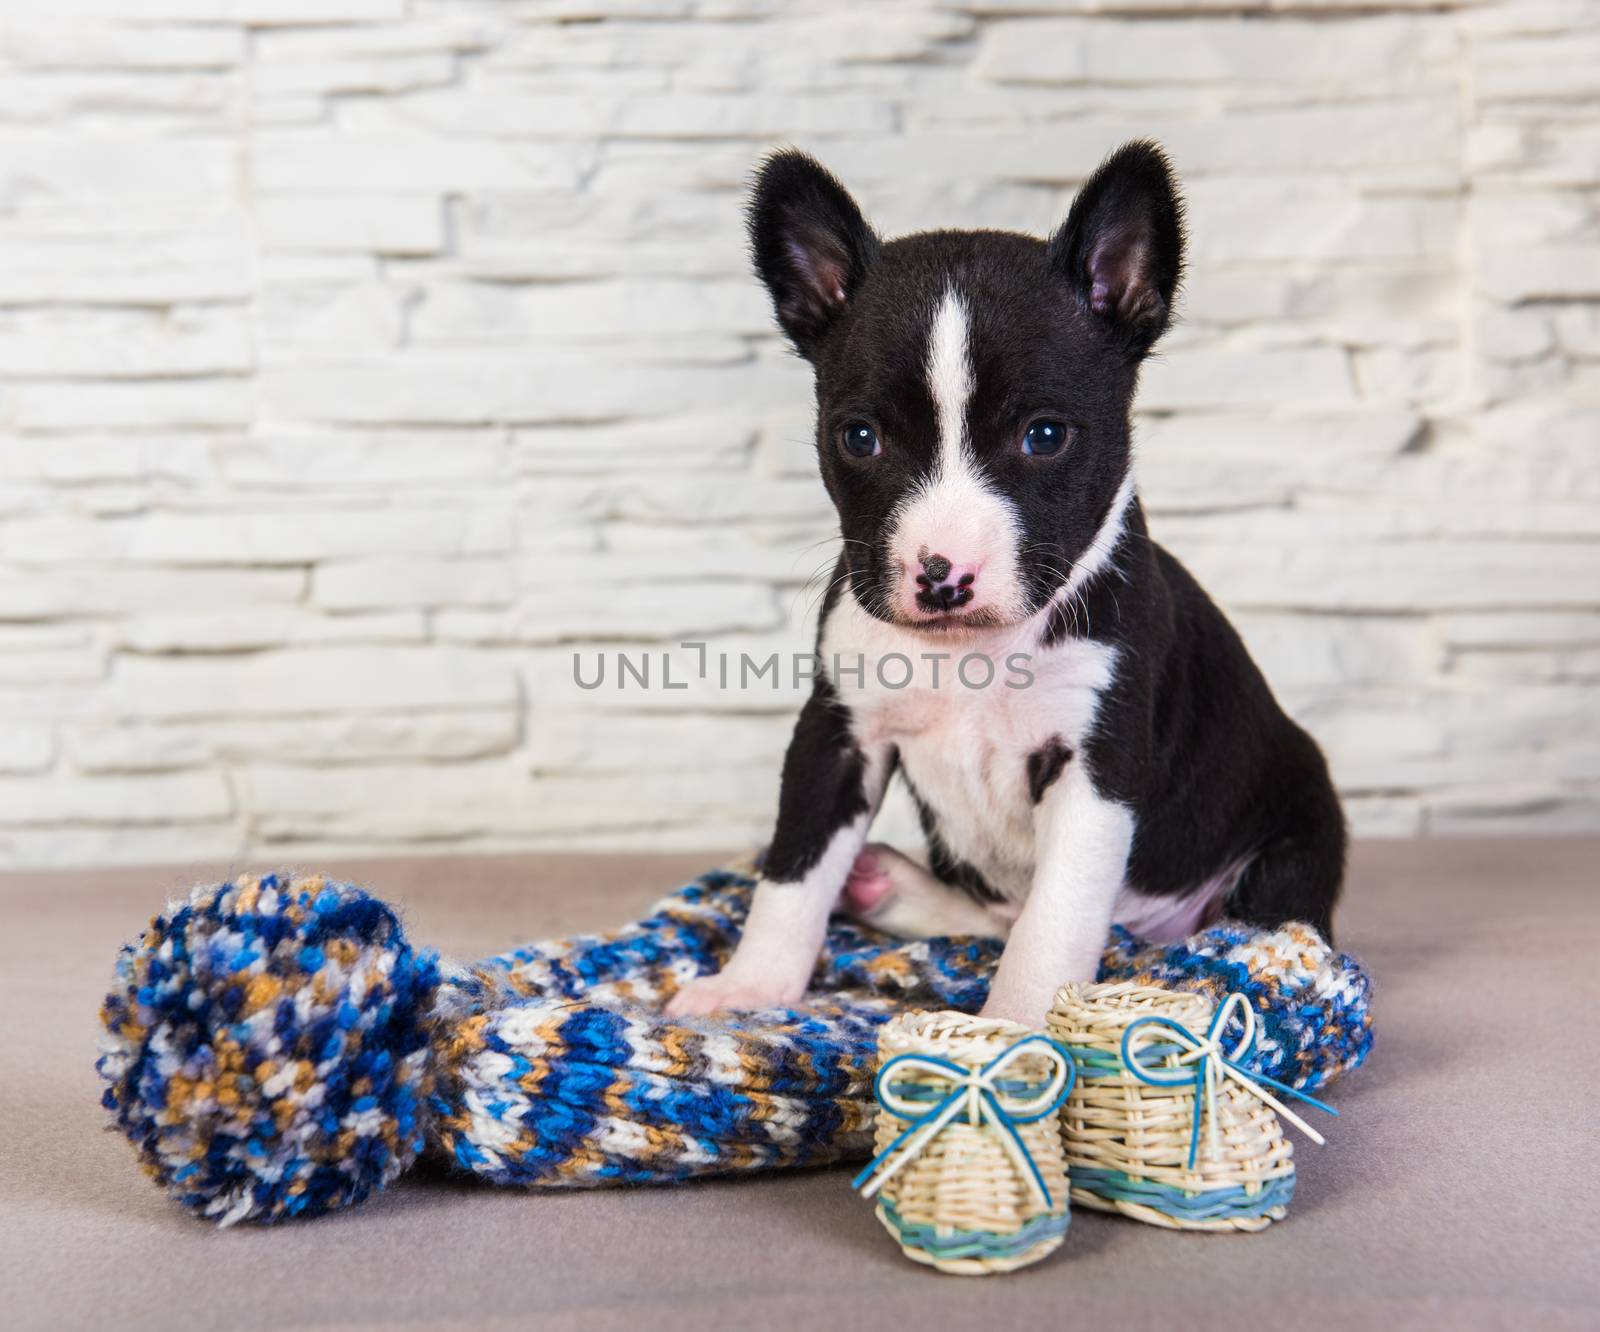 Cute funny black basenji puppy dog is sitting next to blue knitted hat with pompom and boots. Winter Christmas or New Year card background